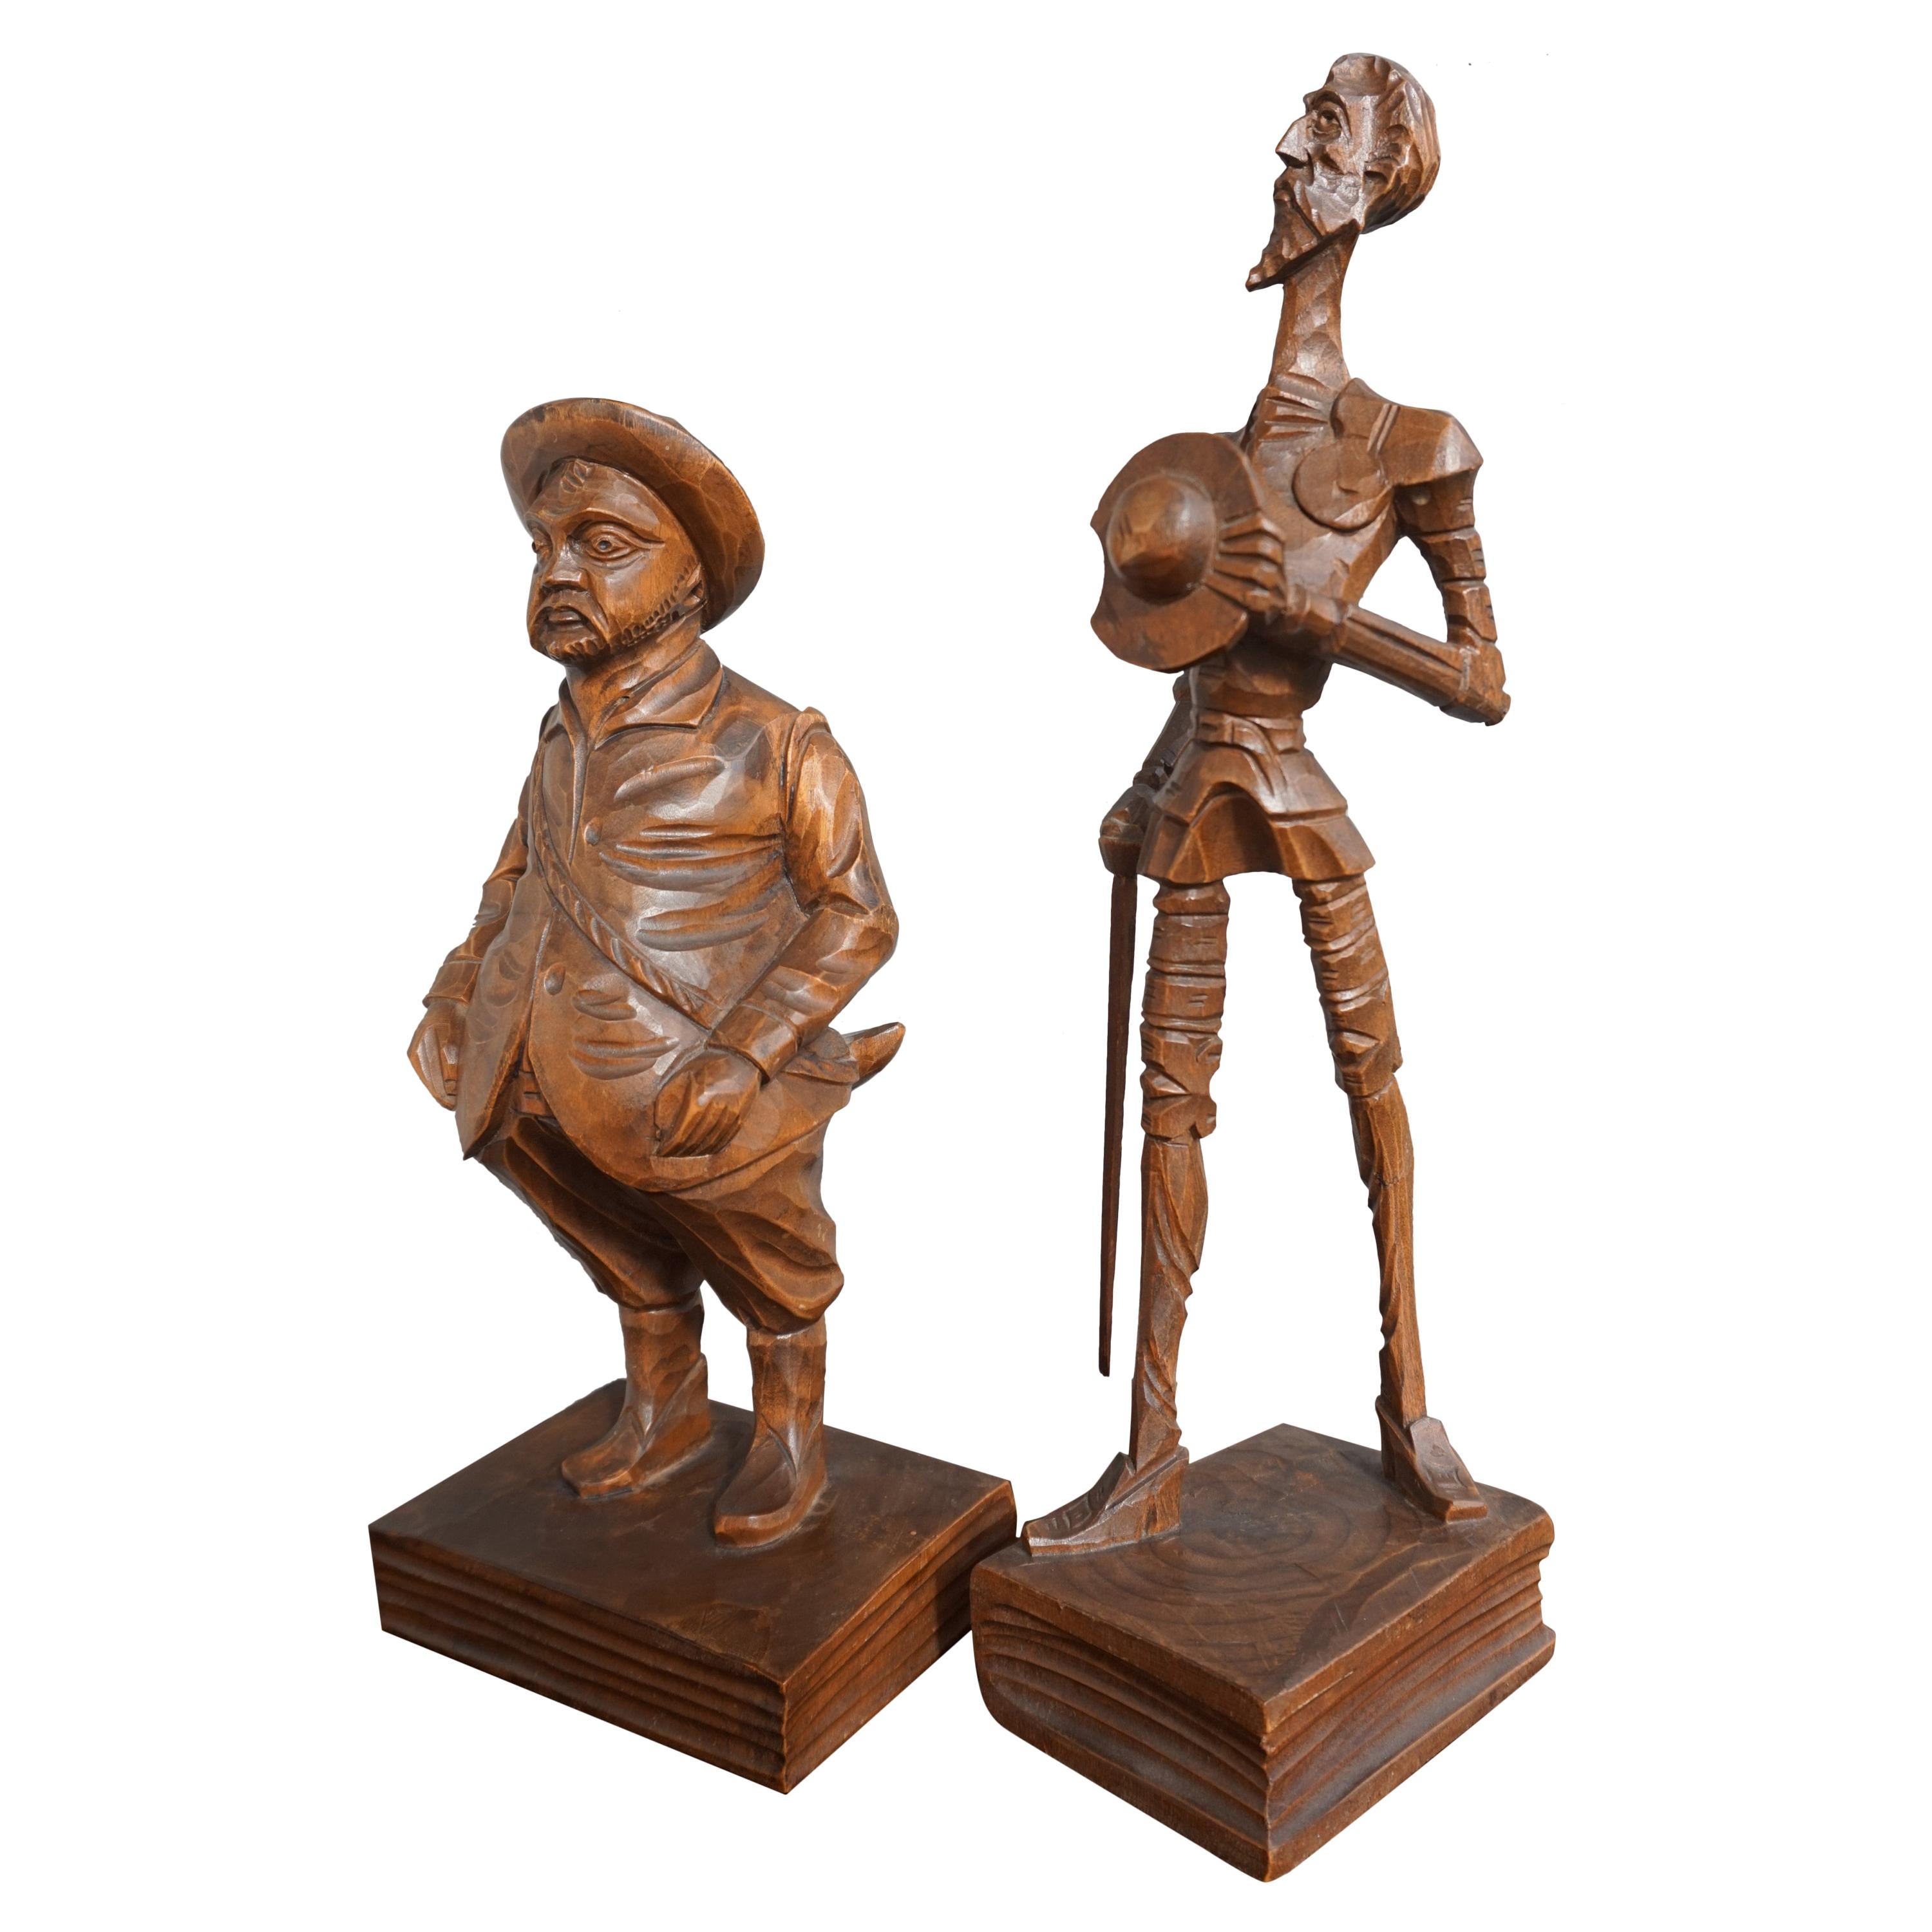 Hand Carved Don Quixote and Sancho Panza Sculptures from the Arts & Crafts Era